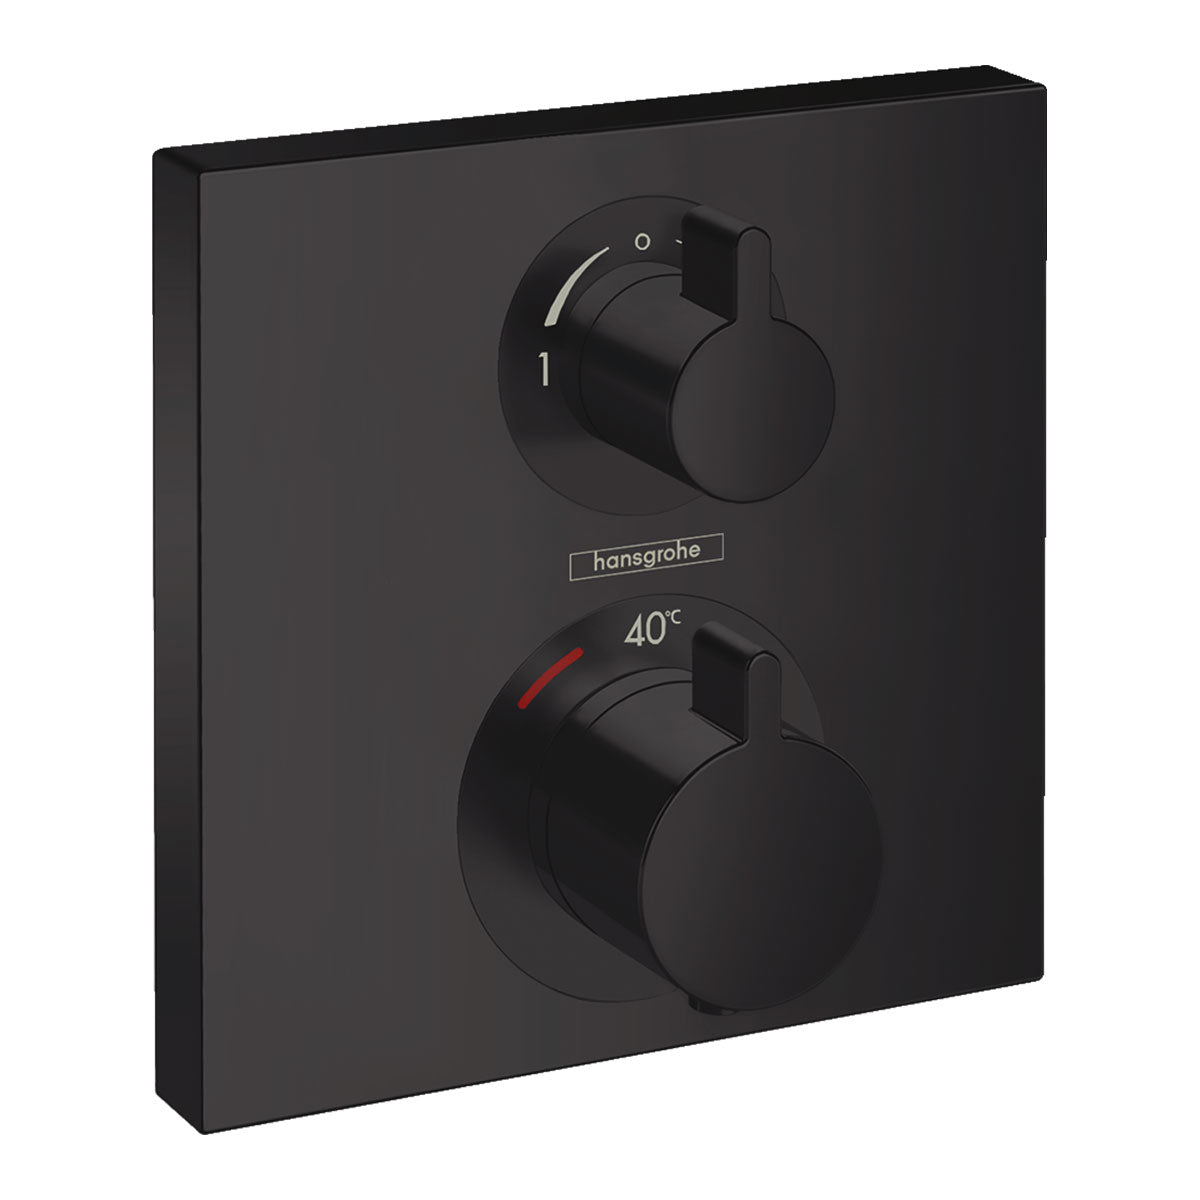 Hansgrohe Square 2 Outlet Thermostatic Valve Matt Black